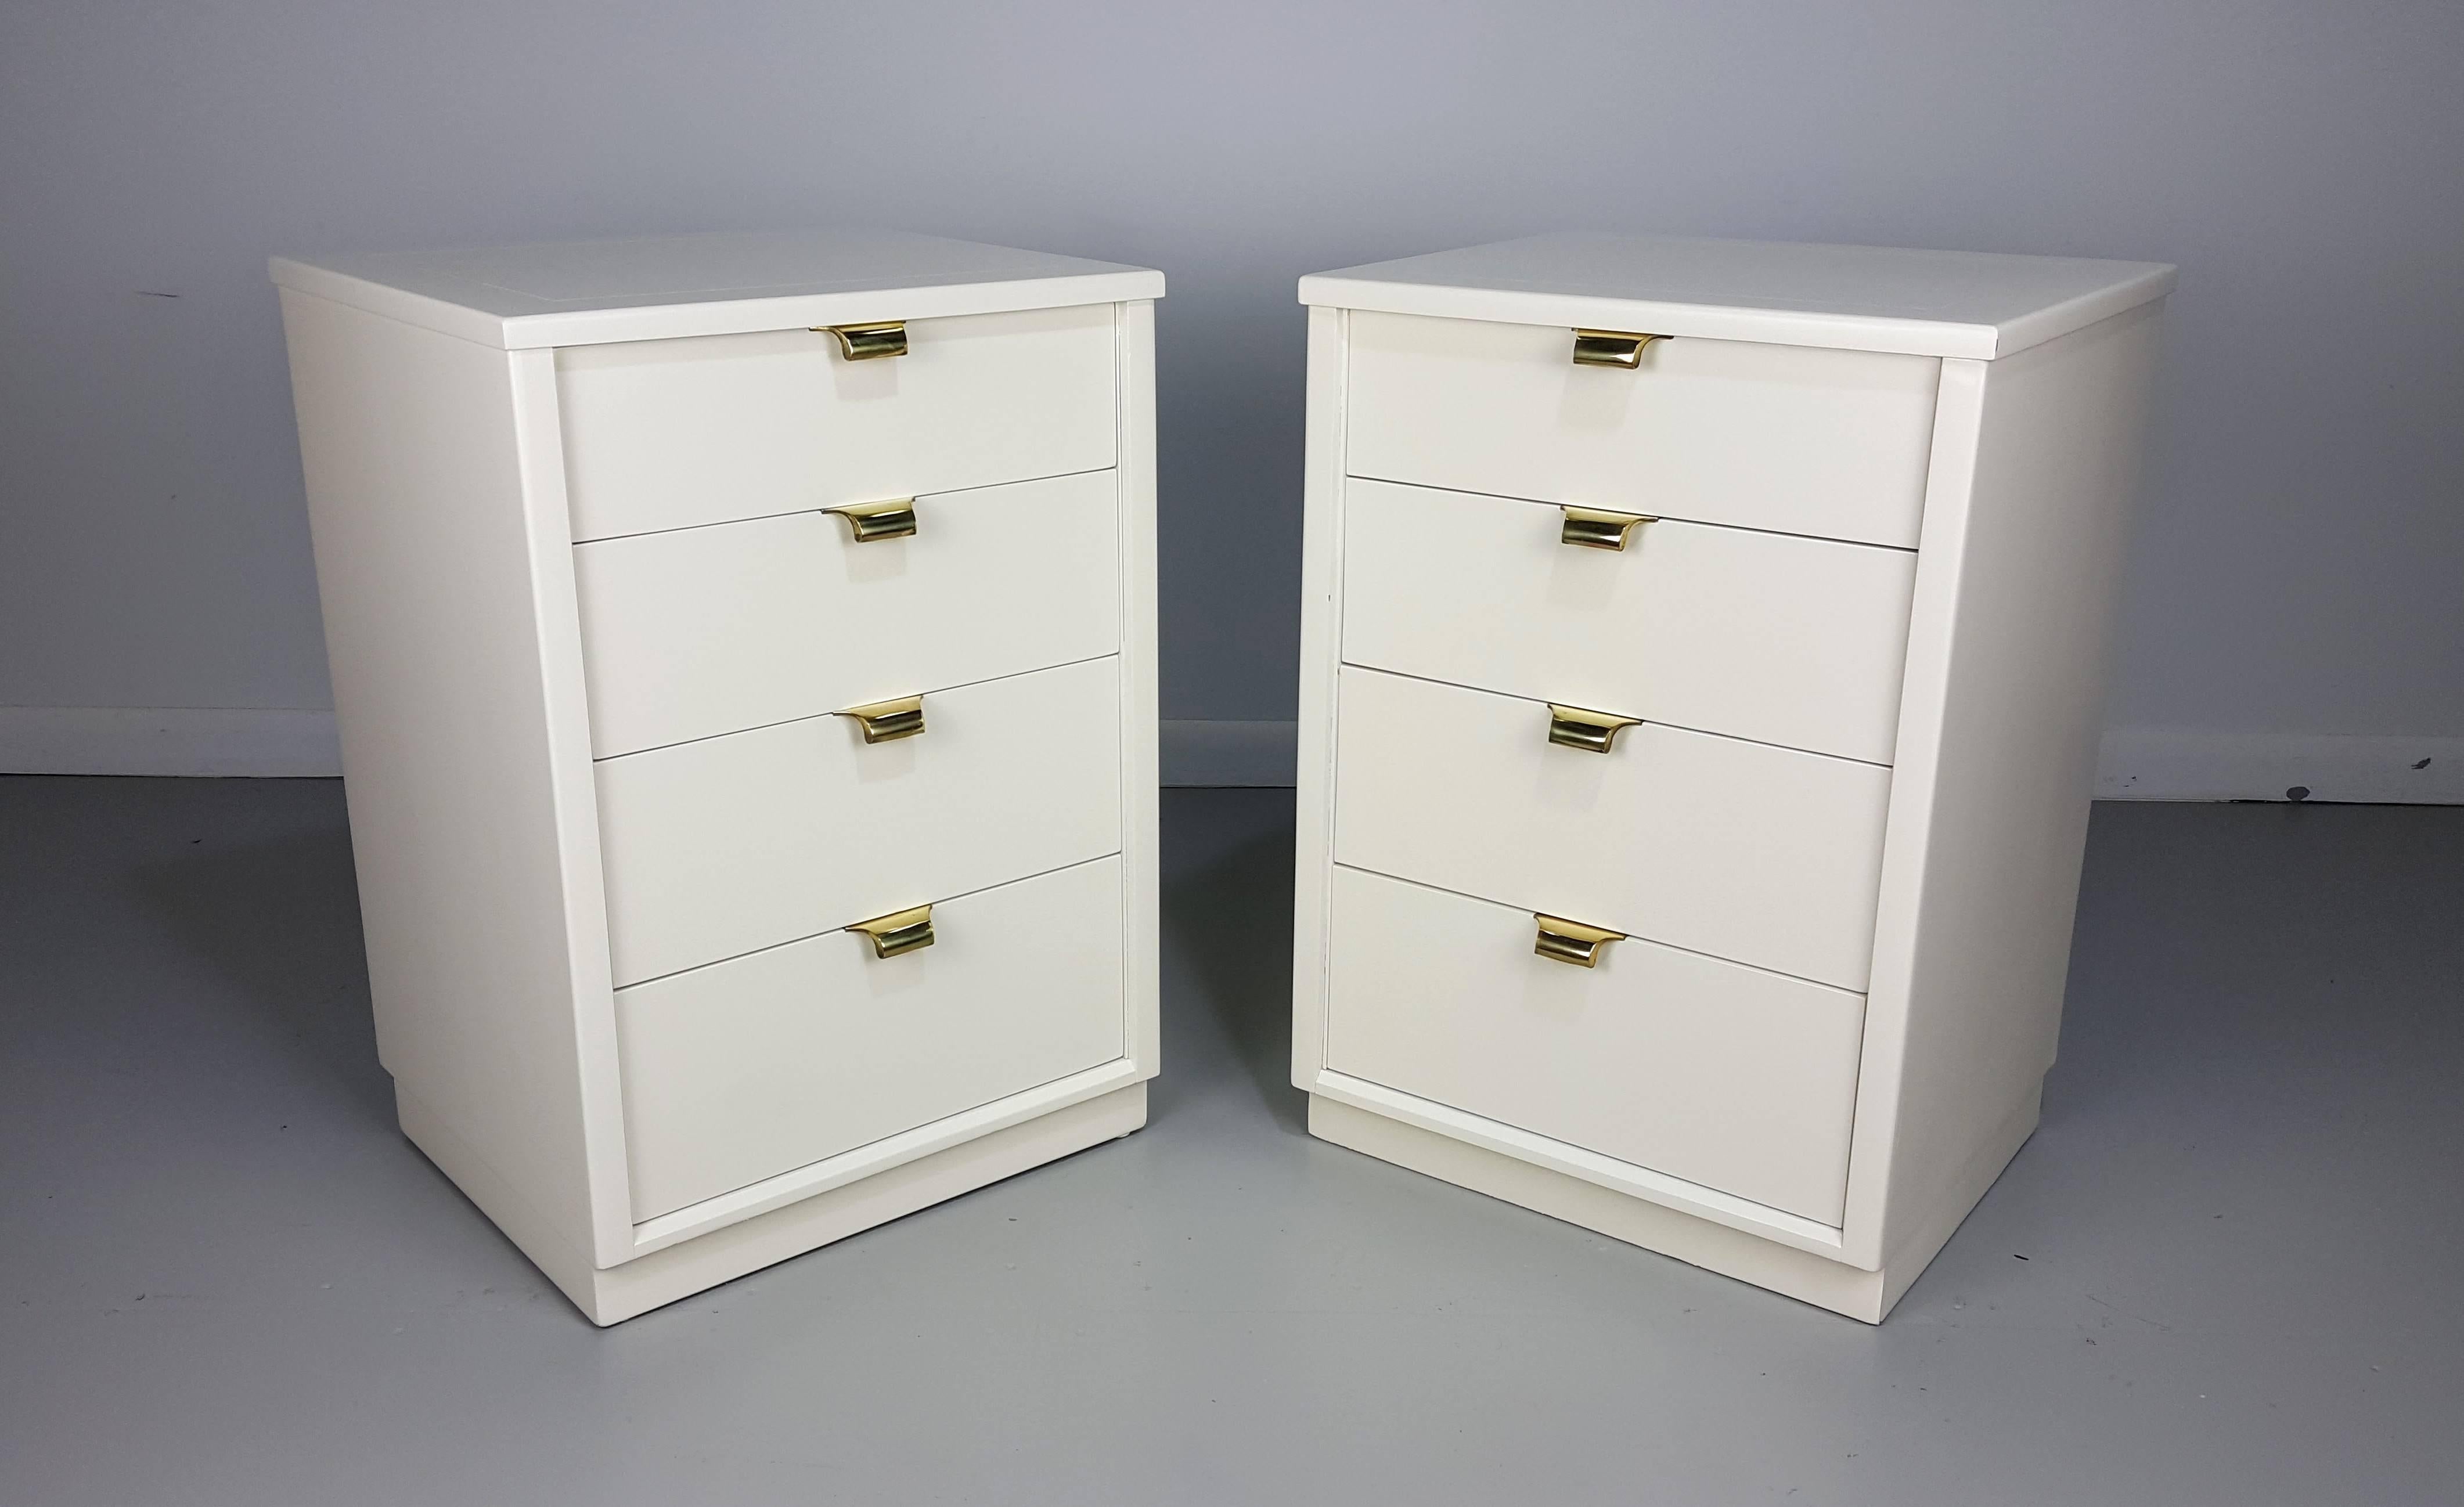 Lacquered nightstands with brass hardware by Edward Wormley, 1950s. Beautifully restored and in excellent condition. 

See this item in our private NYC showroom! Refine Limited is located in the heart of Chelsea at the history Starrett-LeHigh